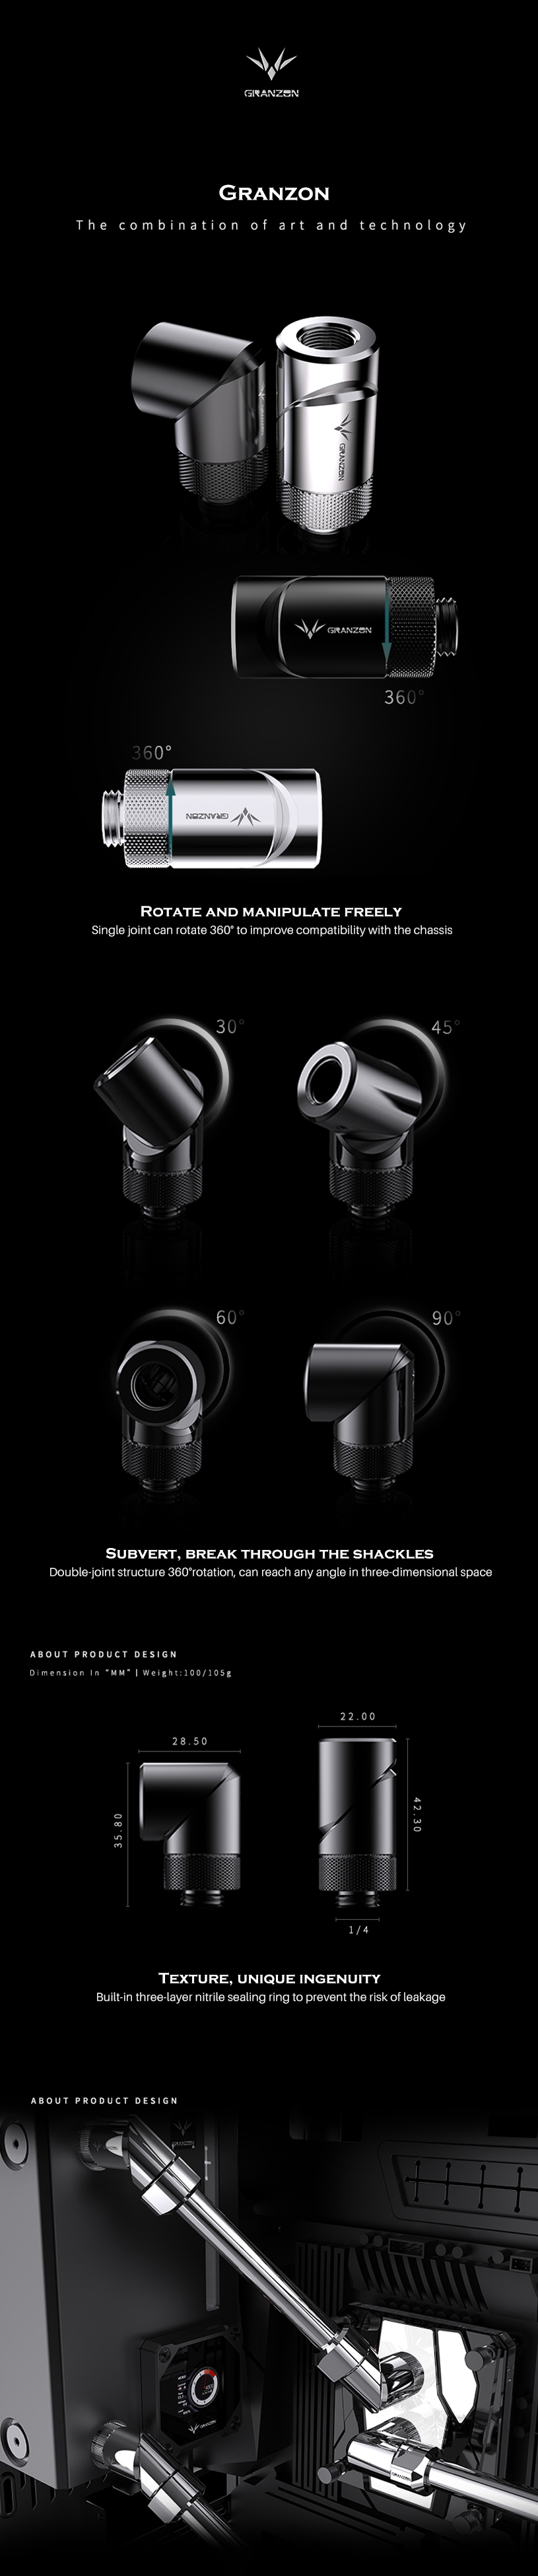 A large marketing image providing additional information about the product Bykski Granzon GD-SK G1/4 Male to Female 0-90 Degree Elbow Fitting - Black - Additional alt info not provided